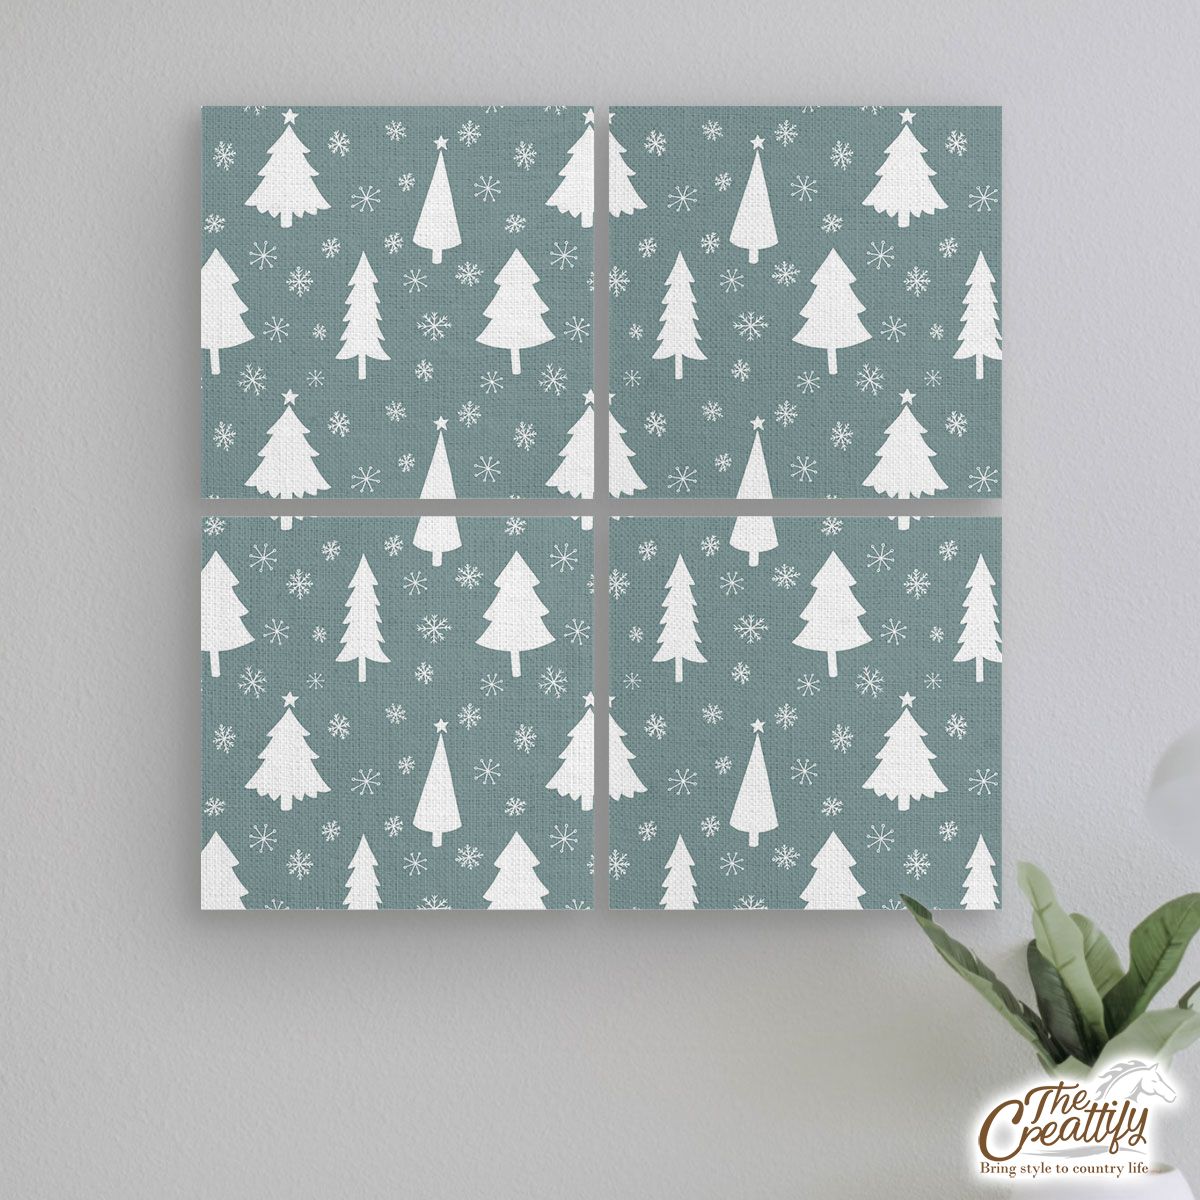 Pine Tree Sillhouette And Snowflake Seamless Pattern Mural With Frame